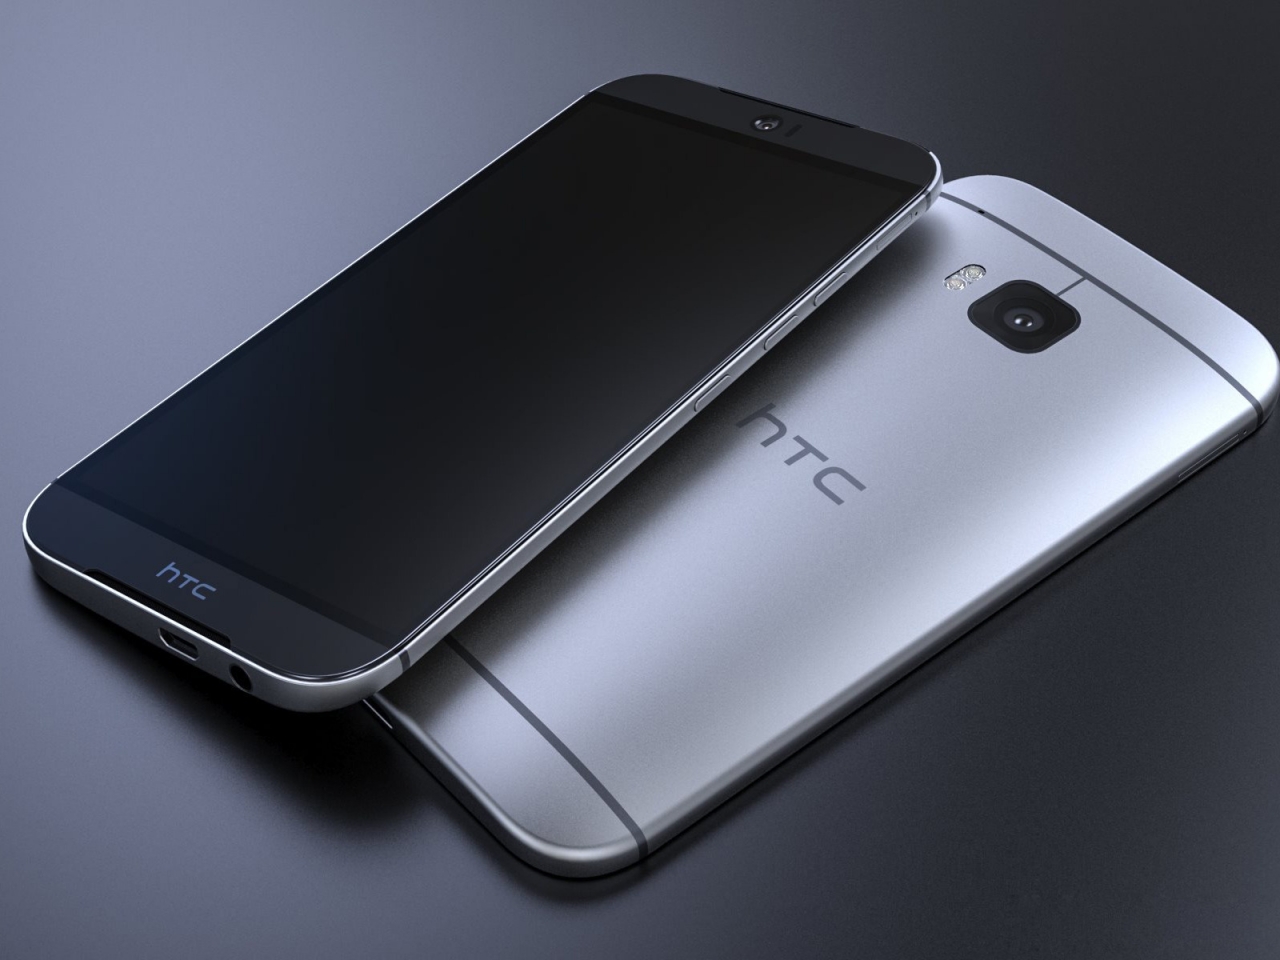 HTC One M9 for 1280 x 960 resolution